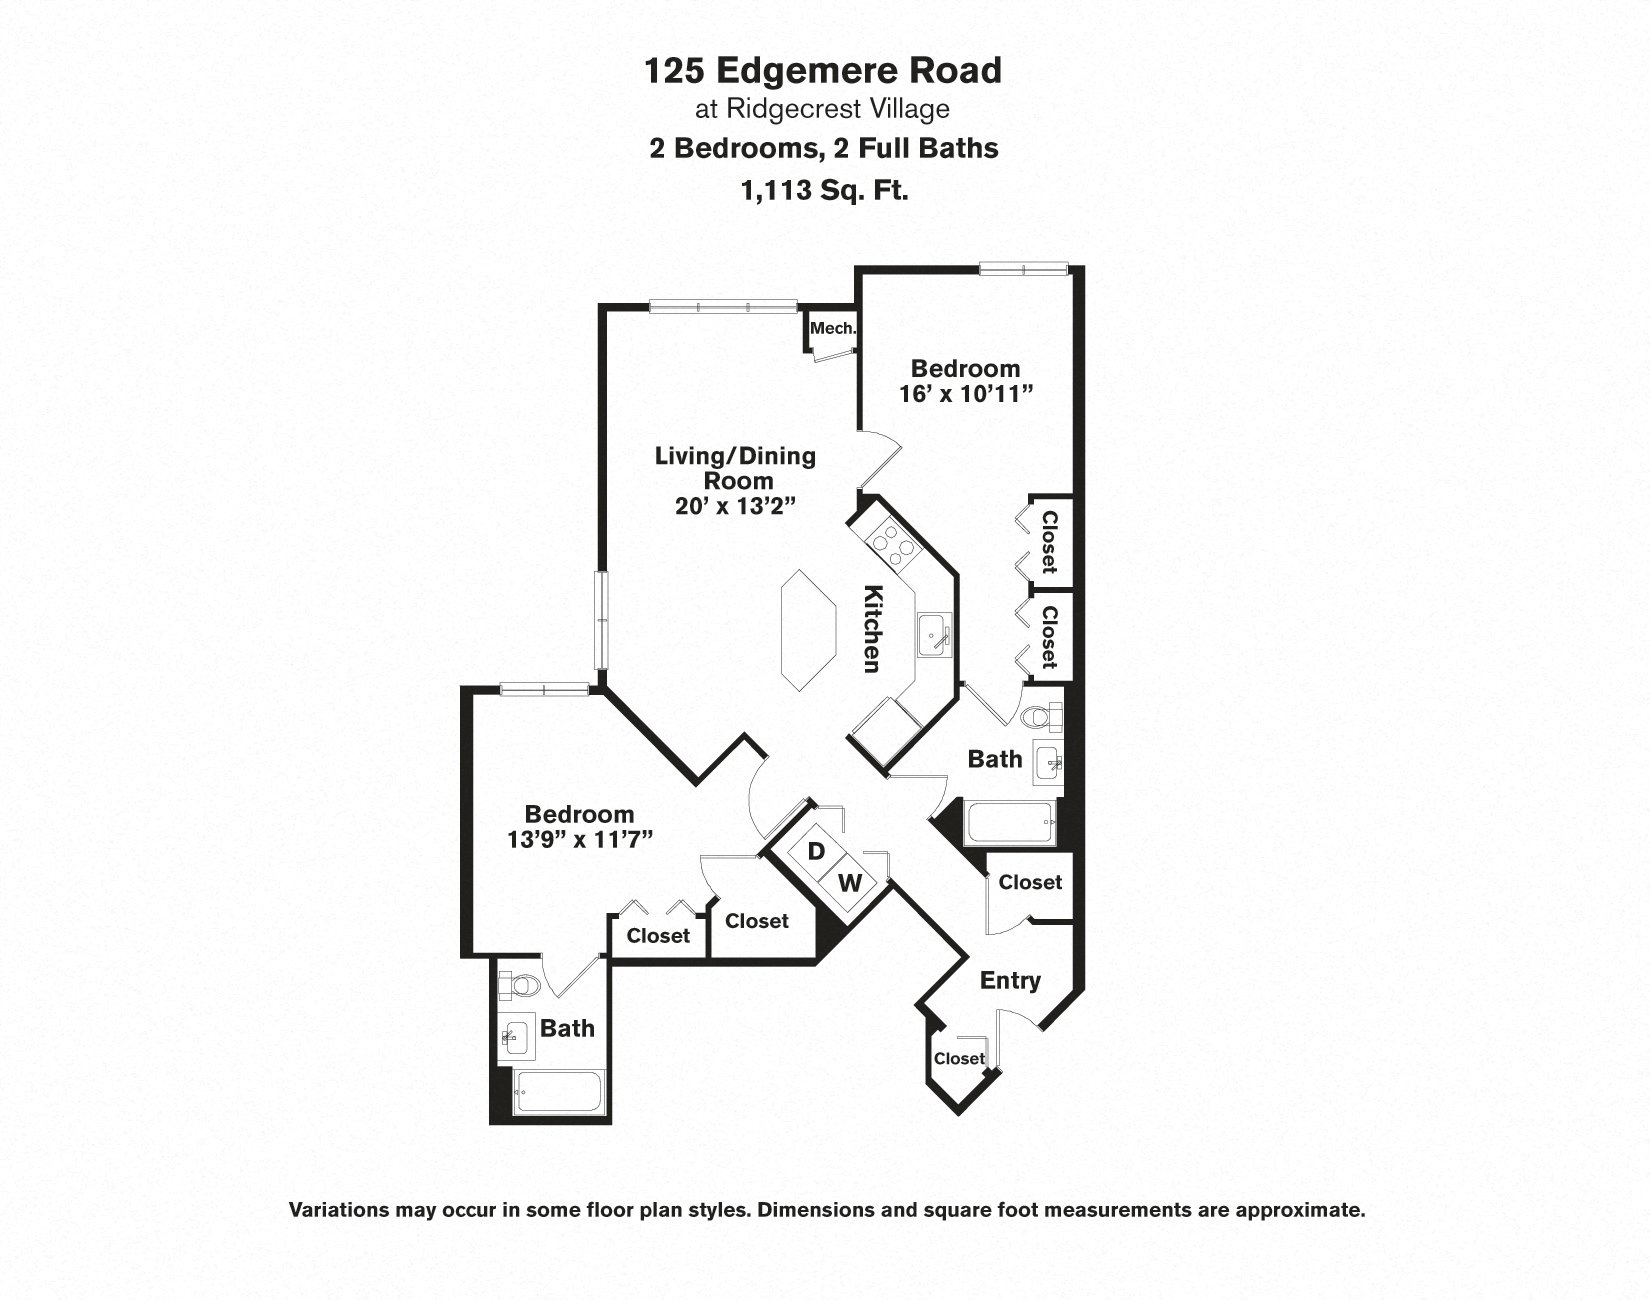 Click to view Floor plan 2 Bed/2 Bath - Edgemere image 3